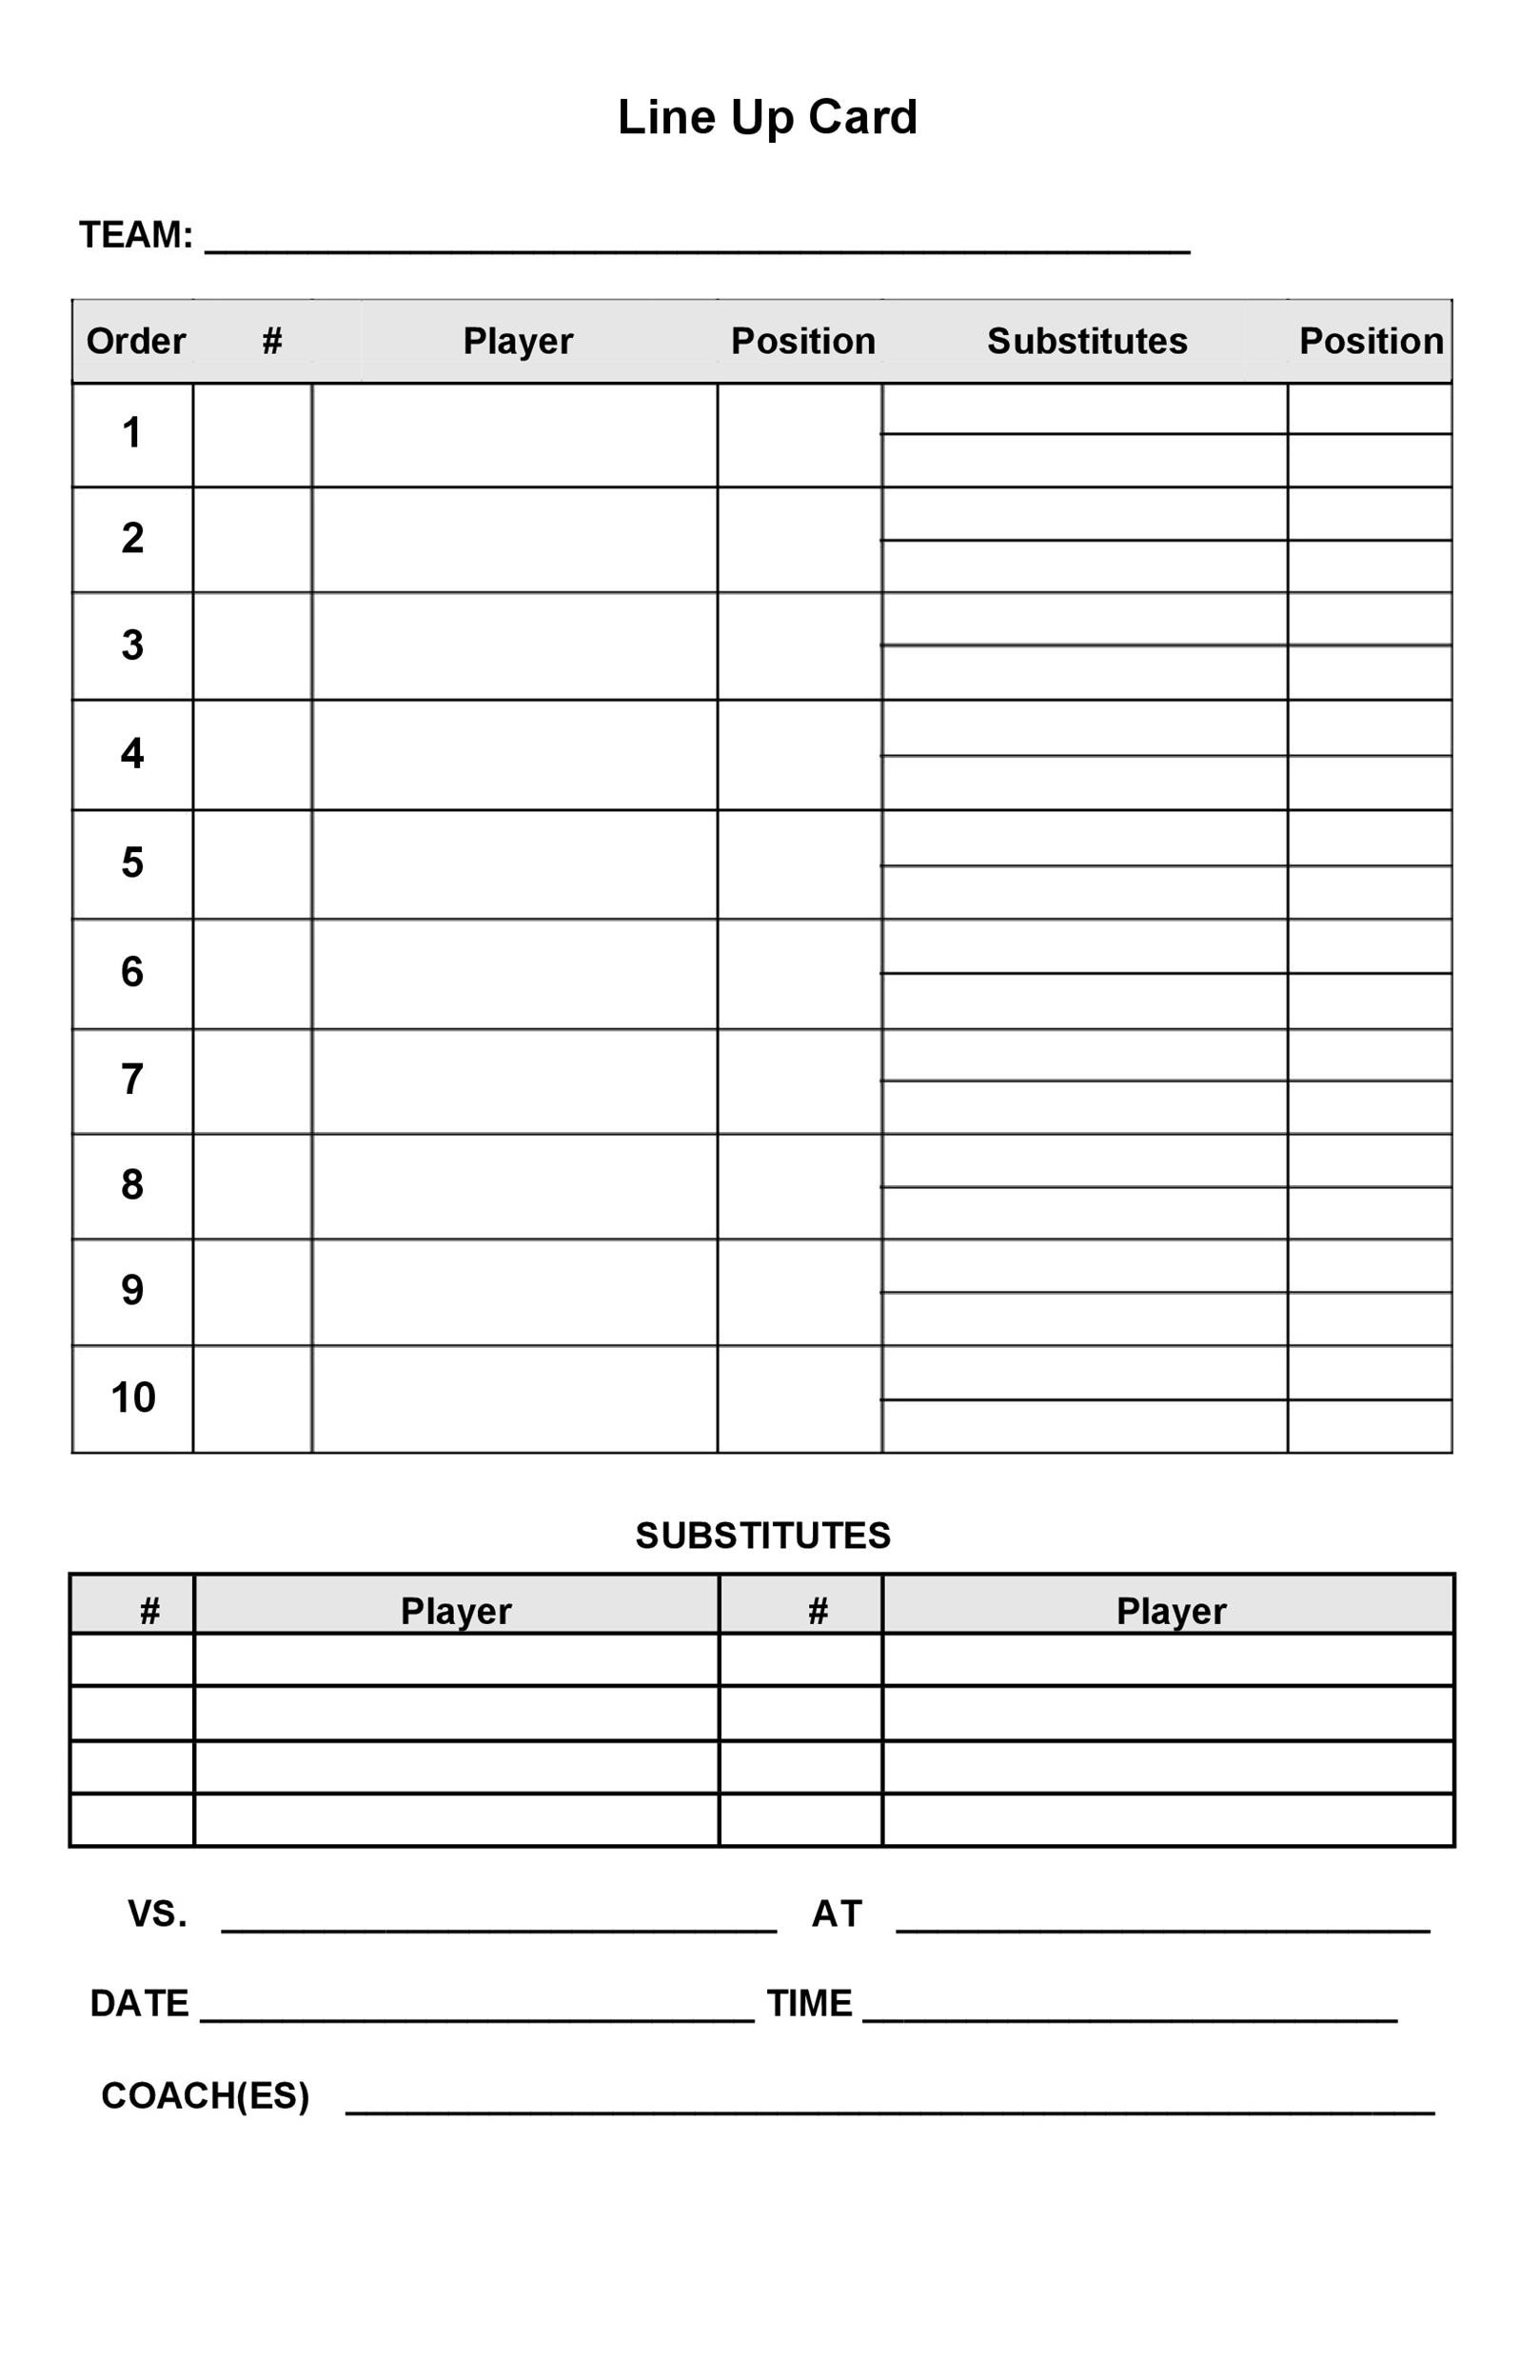 Download Baseball Lineup Cards Images For Free Baseball Lineup Card Template